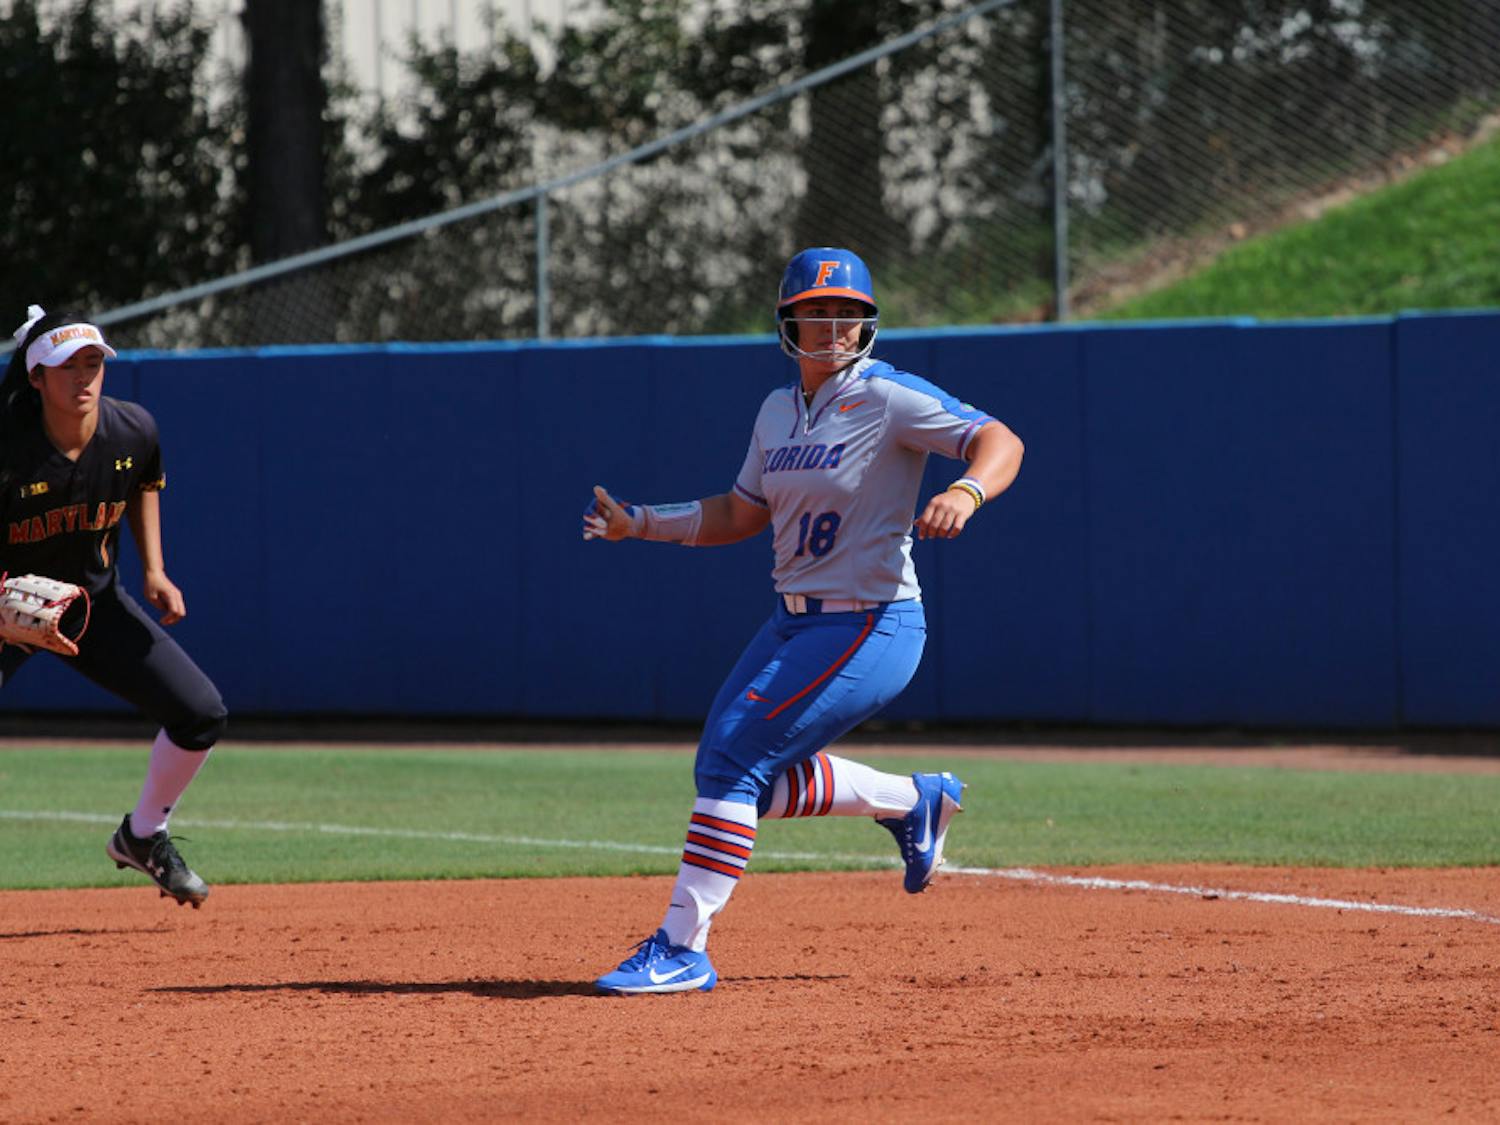 Left fielder Amanda Lorenz tied up the score in the bottom of the fifth inning with a 3-RBI triple in Florida's 5-3 victory over LSU.